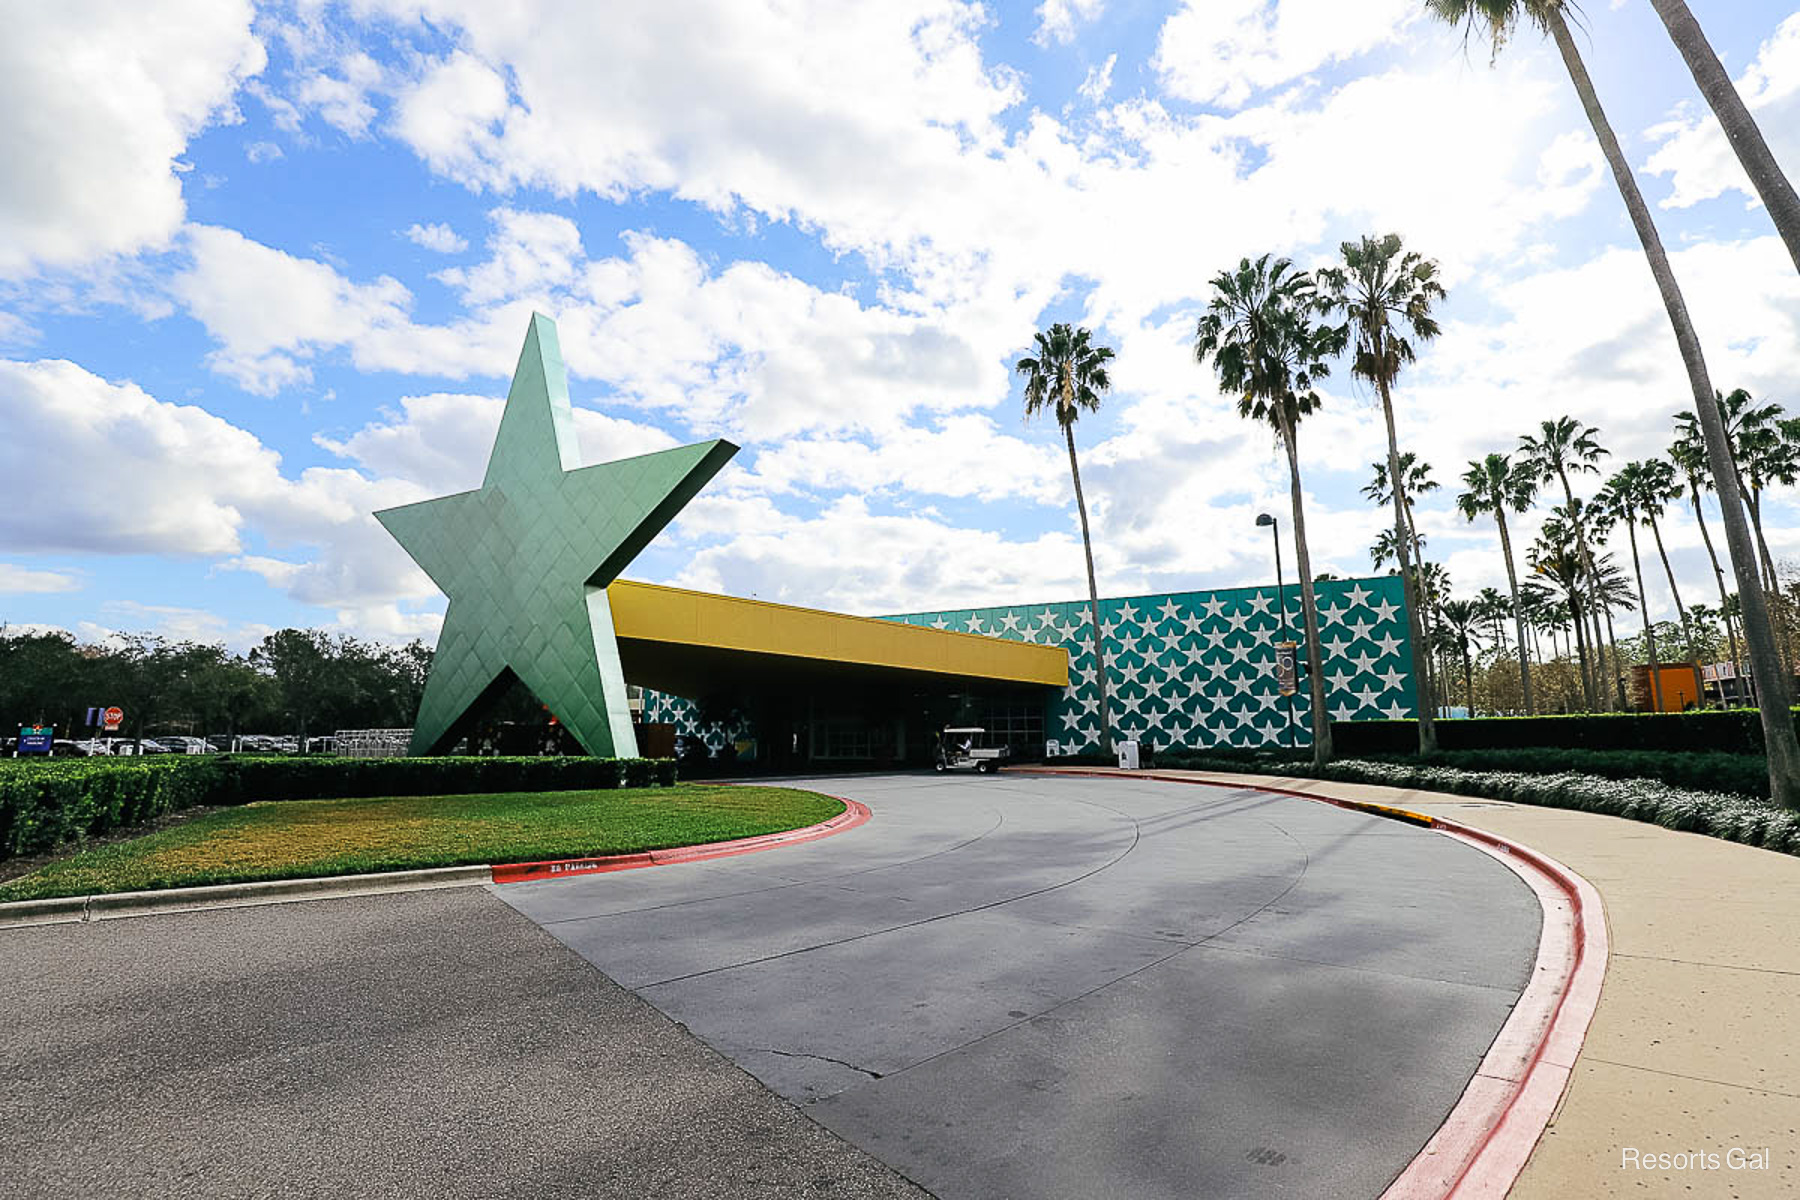 the entrance to All-Star Movies with the green star at the front